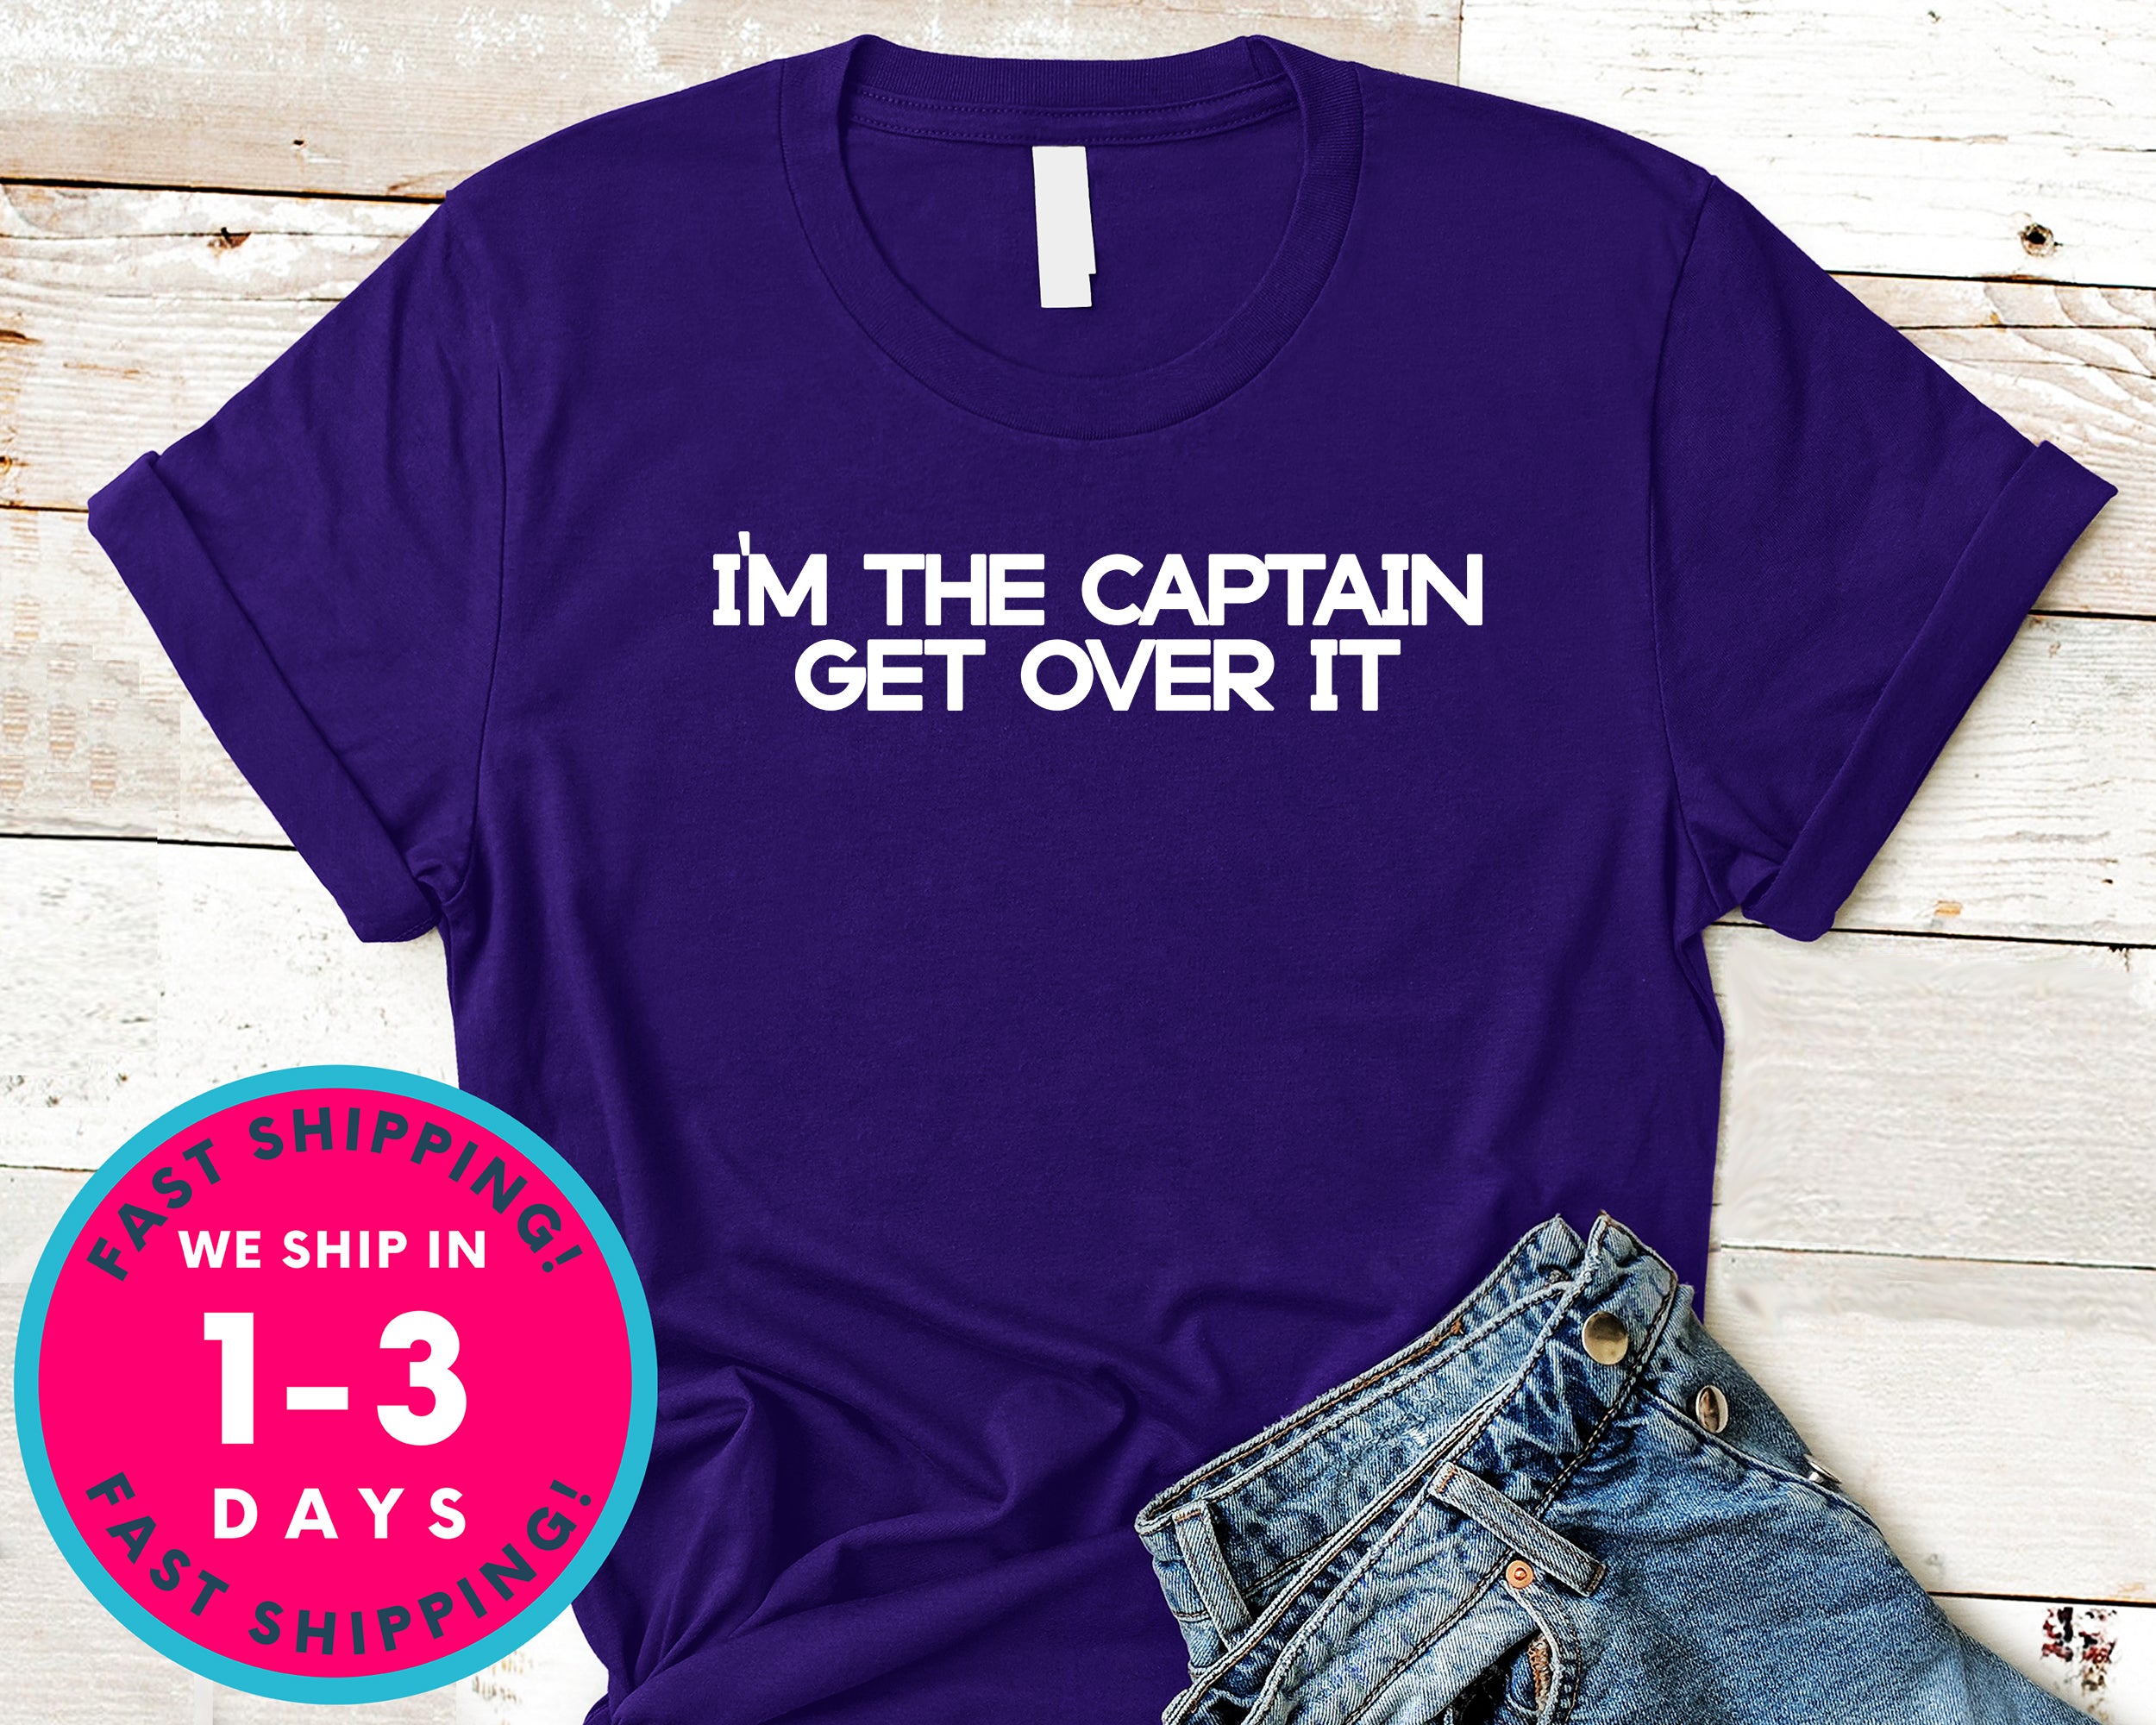 I'm The Captain Get Over It  Funny Gift T-Shirt - Outdoor Shirt